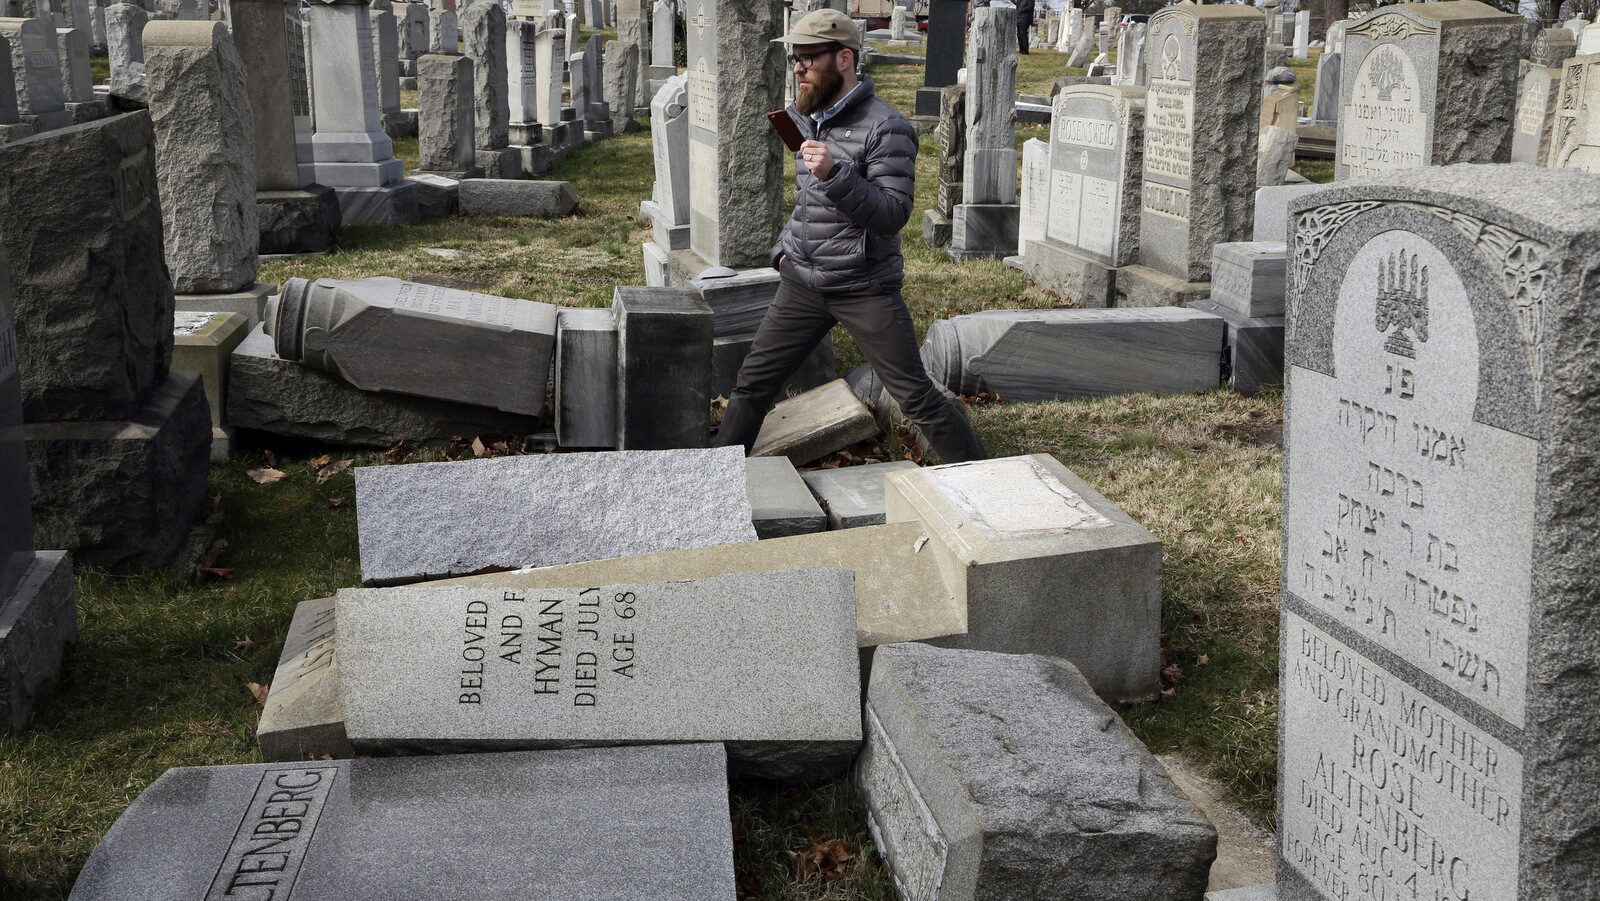 Rabbi Joshua Bolton of the University of Pennsylvania's Hillel center surveys damaged headstones at Mount Carmel Cemetery on Monday, Feb. 27, 2017, in Philadelphia. More than 100 headstones have been vandalized at the Jewish cemetery in Philadelphia, damage discovered less than a week after similar vandalism in Missouri, authorities said. (AP/Jacqueline Larma)